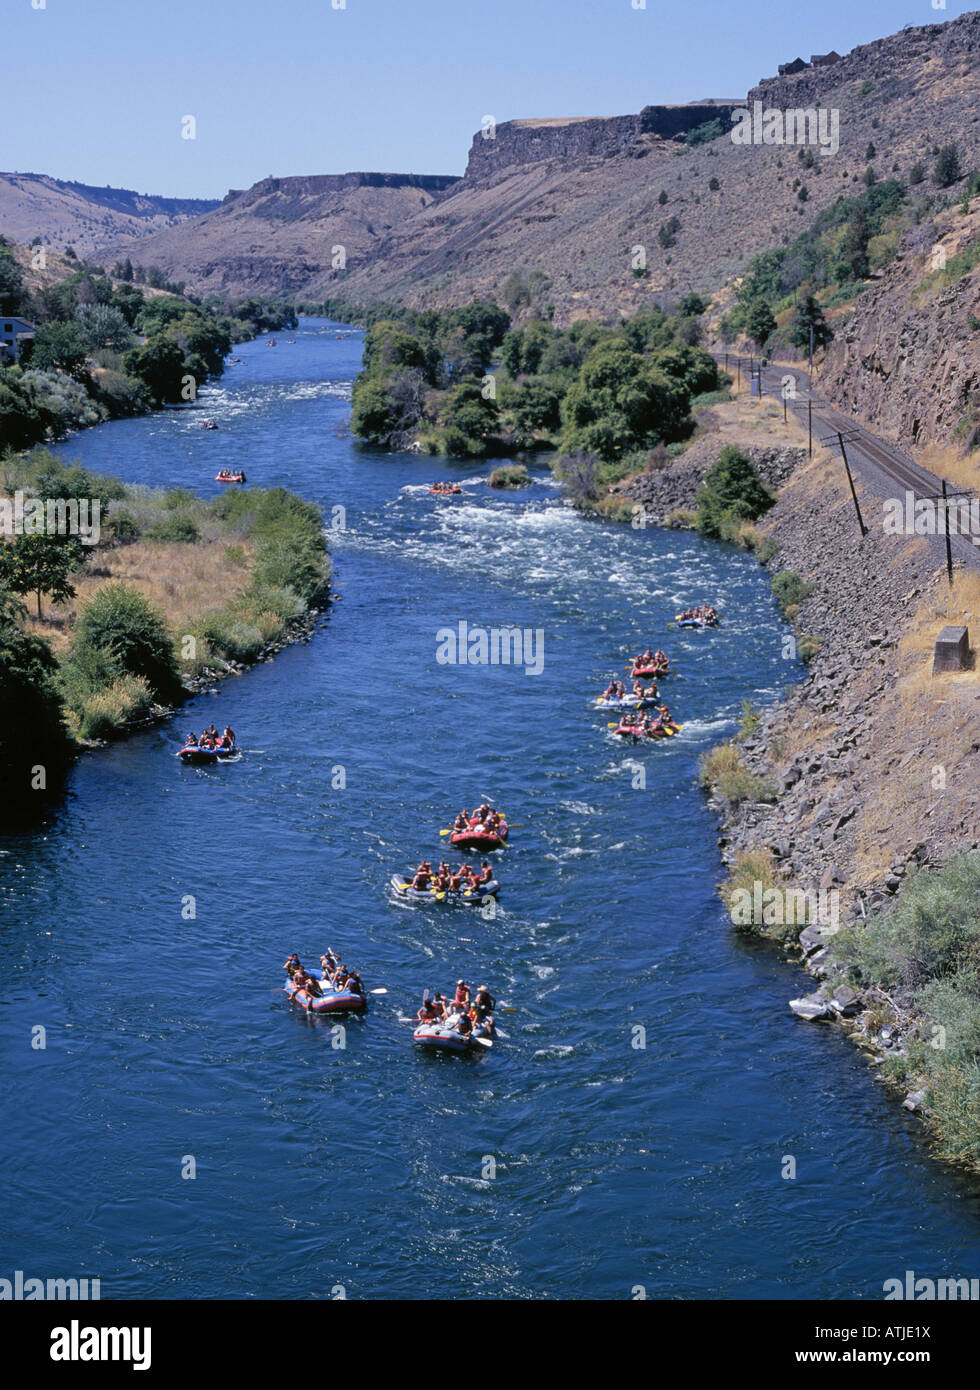 A view of white water rafters on the Lower Deschutes River near the town of Maupin in central Oregon Stock Photo